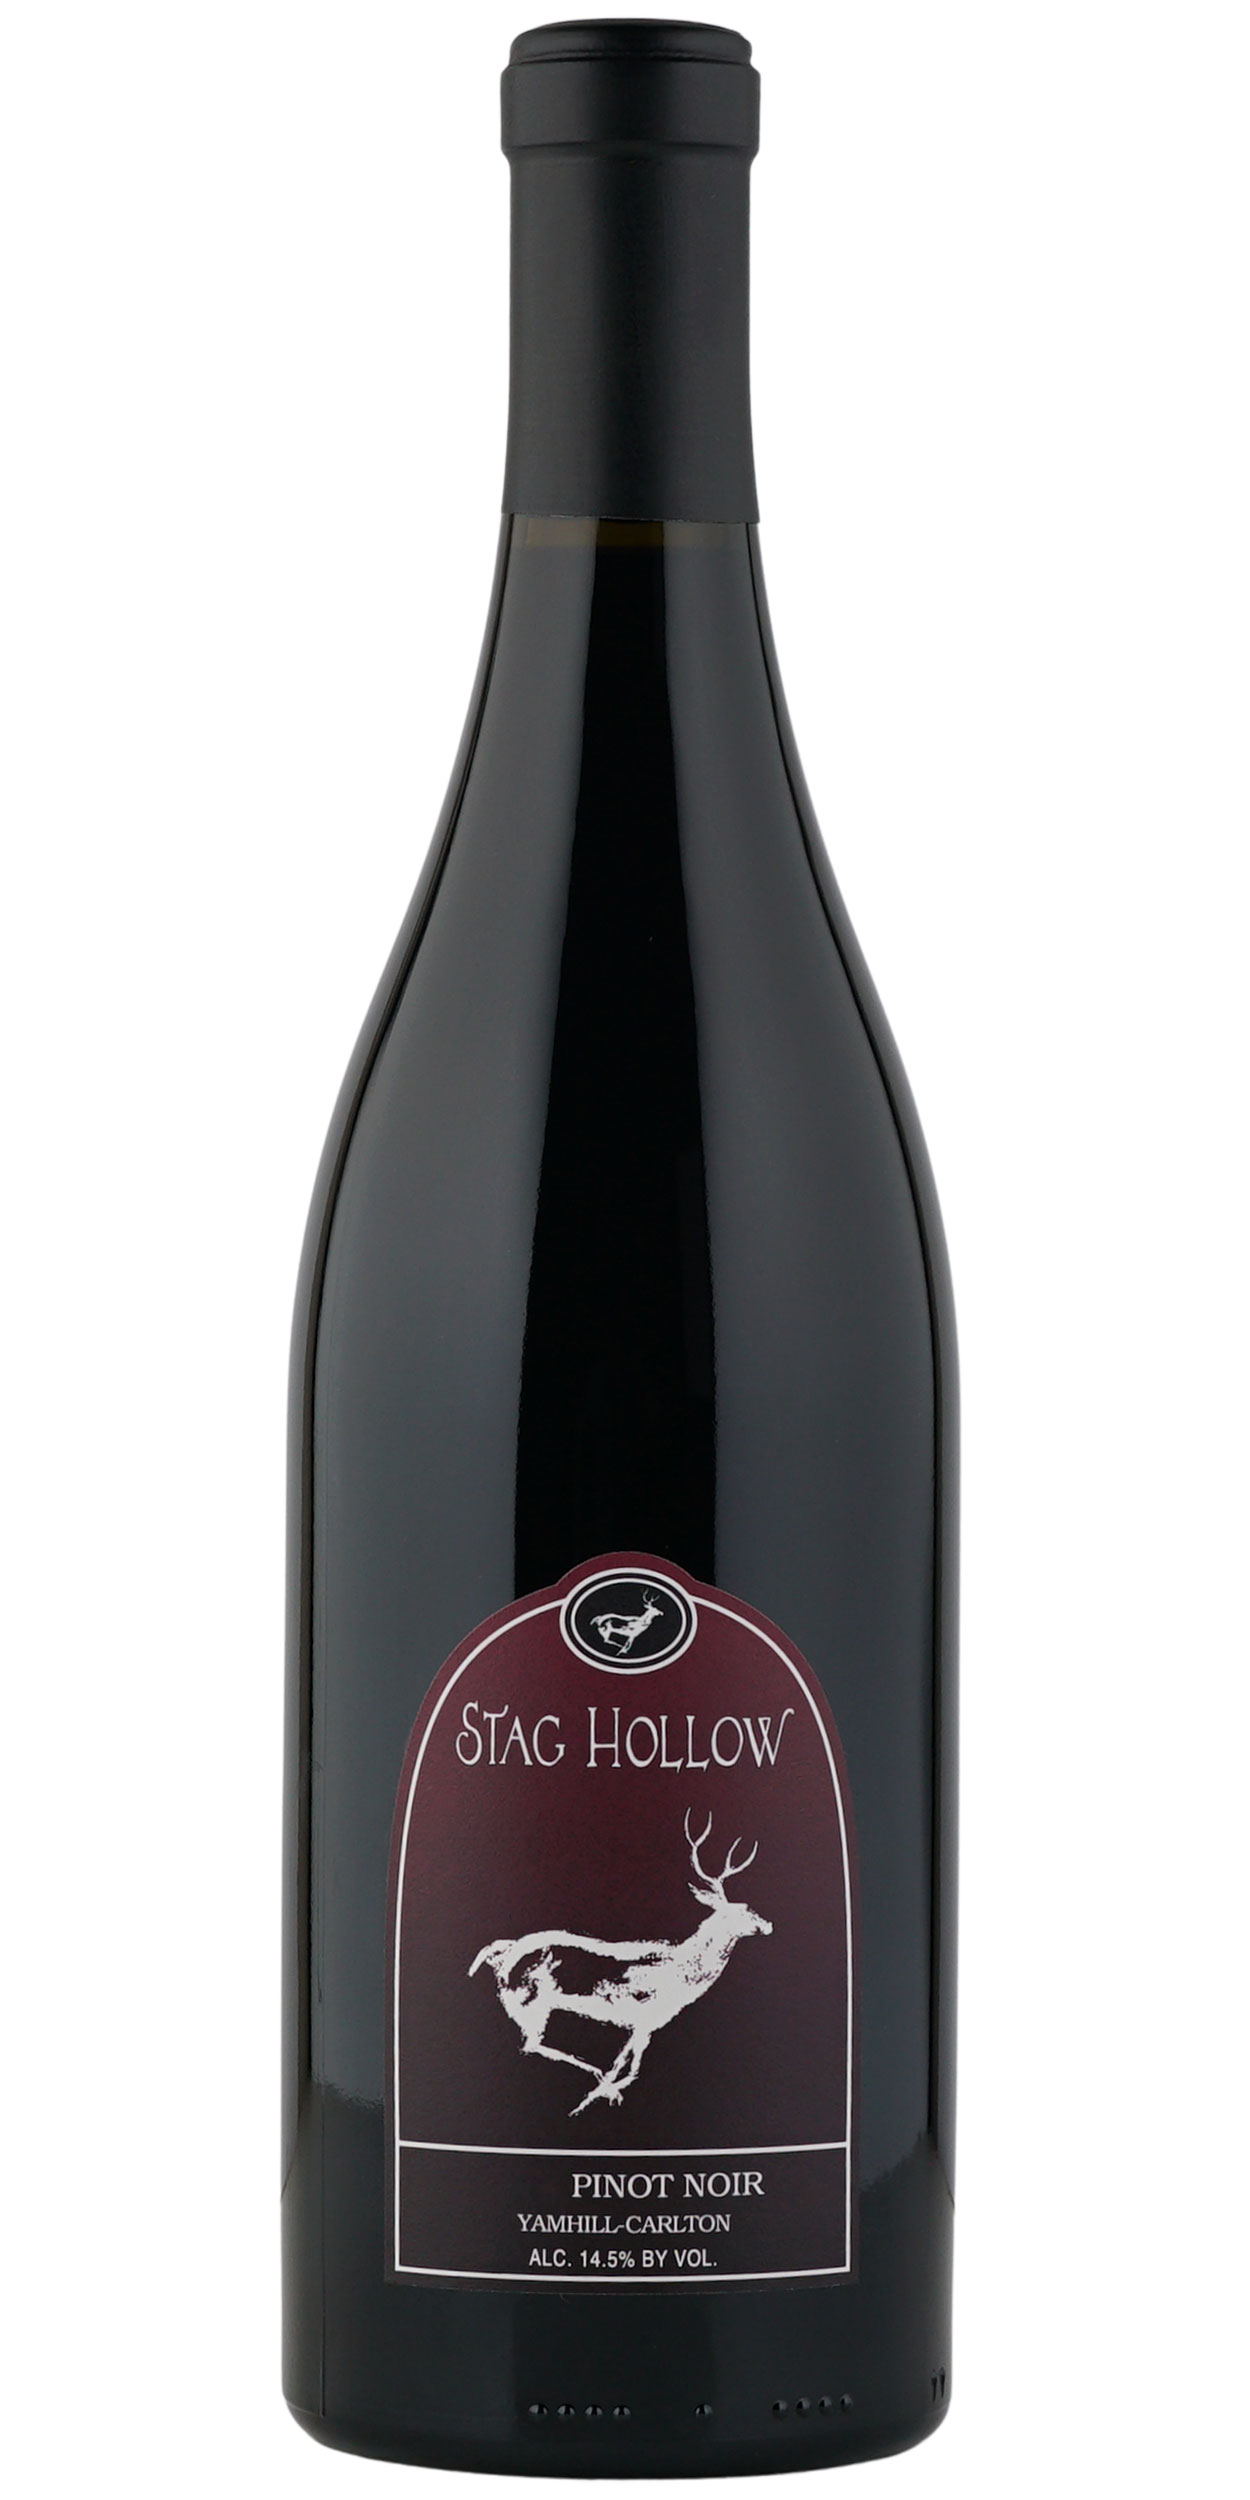 Bottle of Stag Hollow Pinot Noir